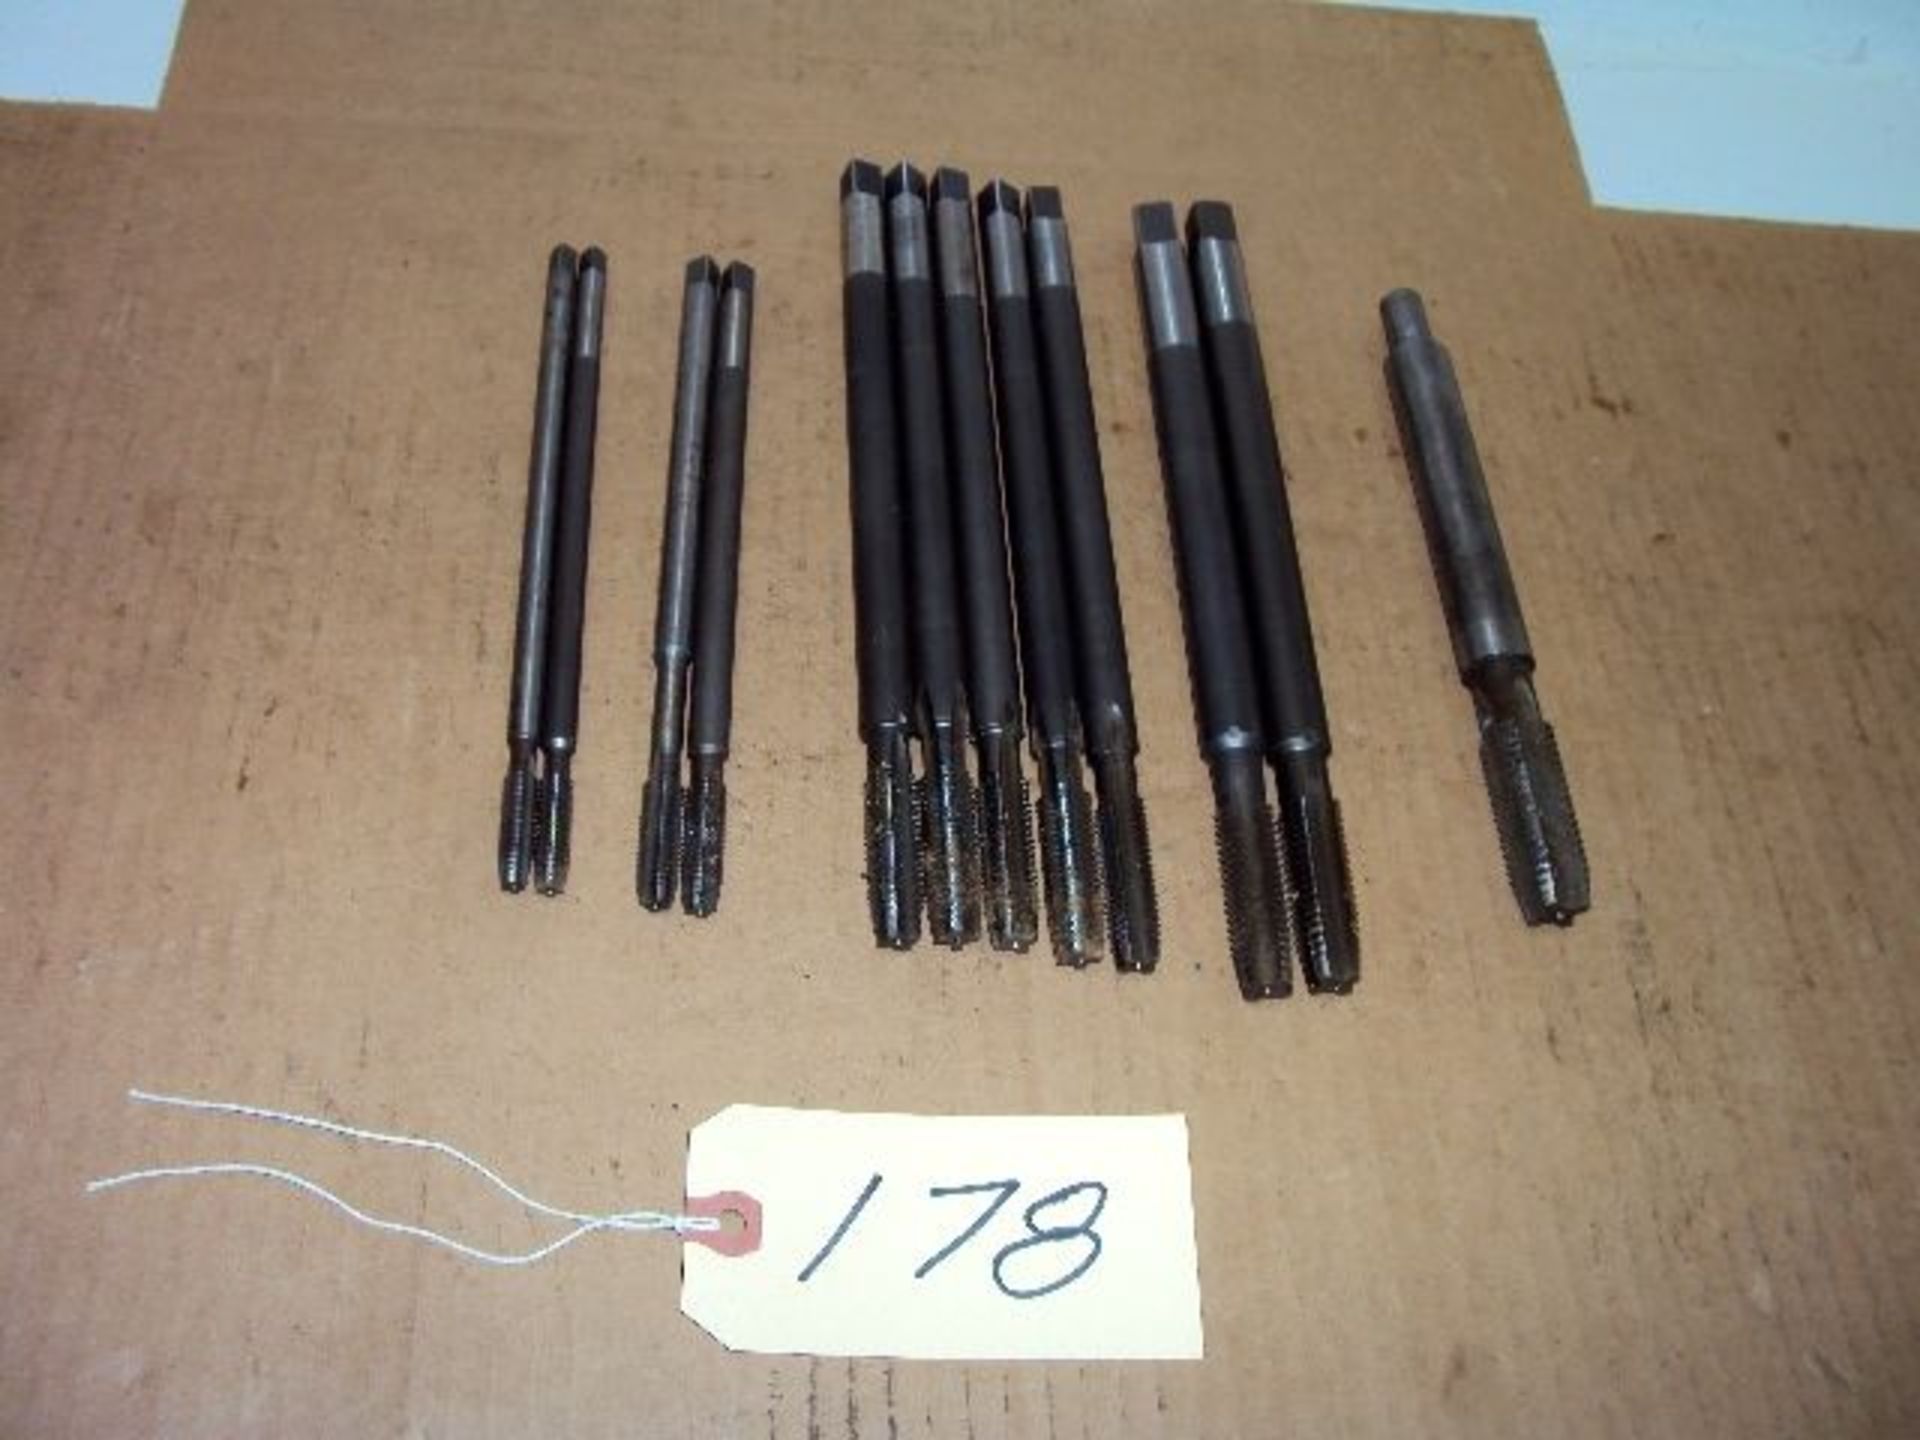 (12) Assorted Long Pulley Taps (1) 3/4” - 10, (2) 5/8” - 11, (5) 1/2” - 13 (2) 3/8” - 16, (2) 5/6” -